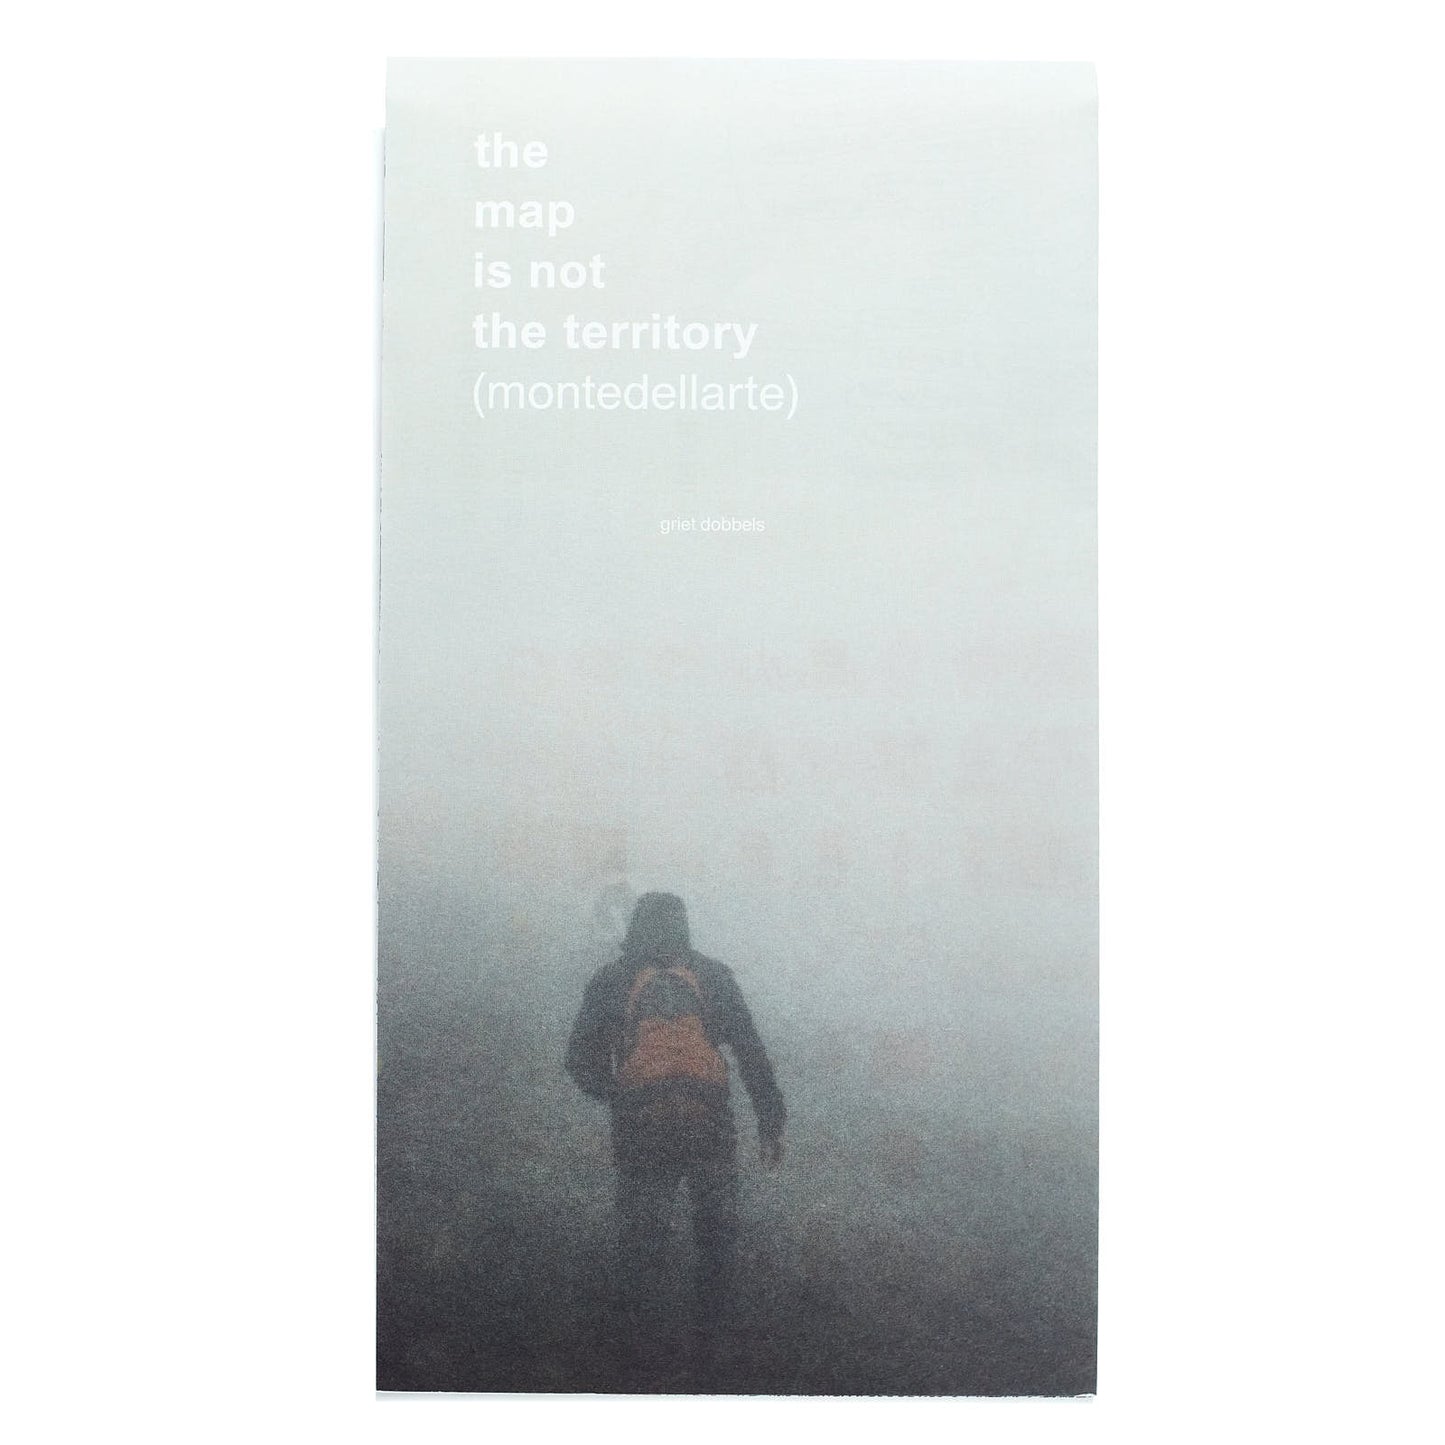 the map is not the territory (montedellarte) (a project by Griet Dobbels)